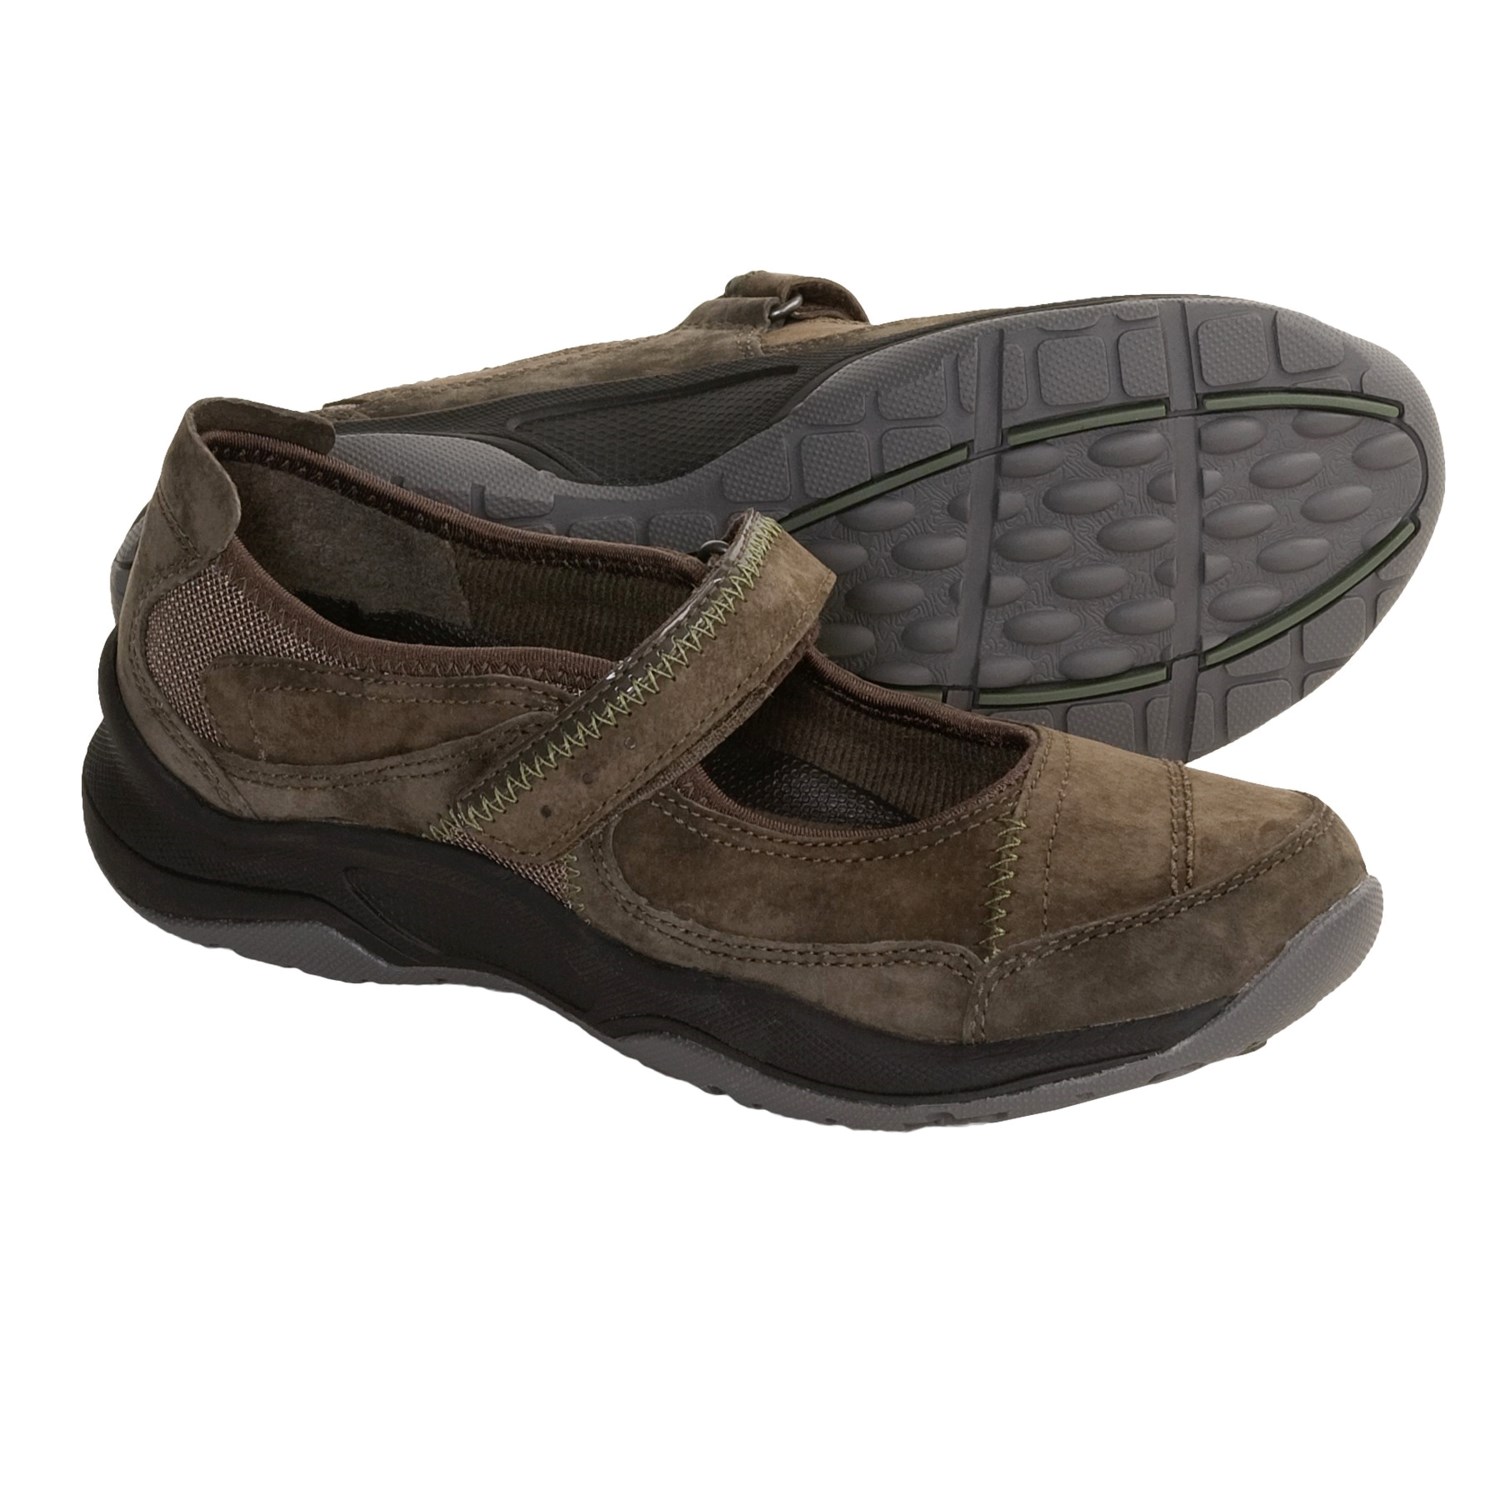 qvc clarks mary janes